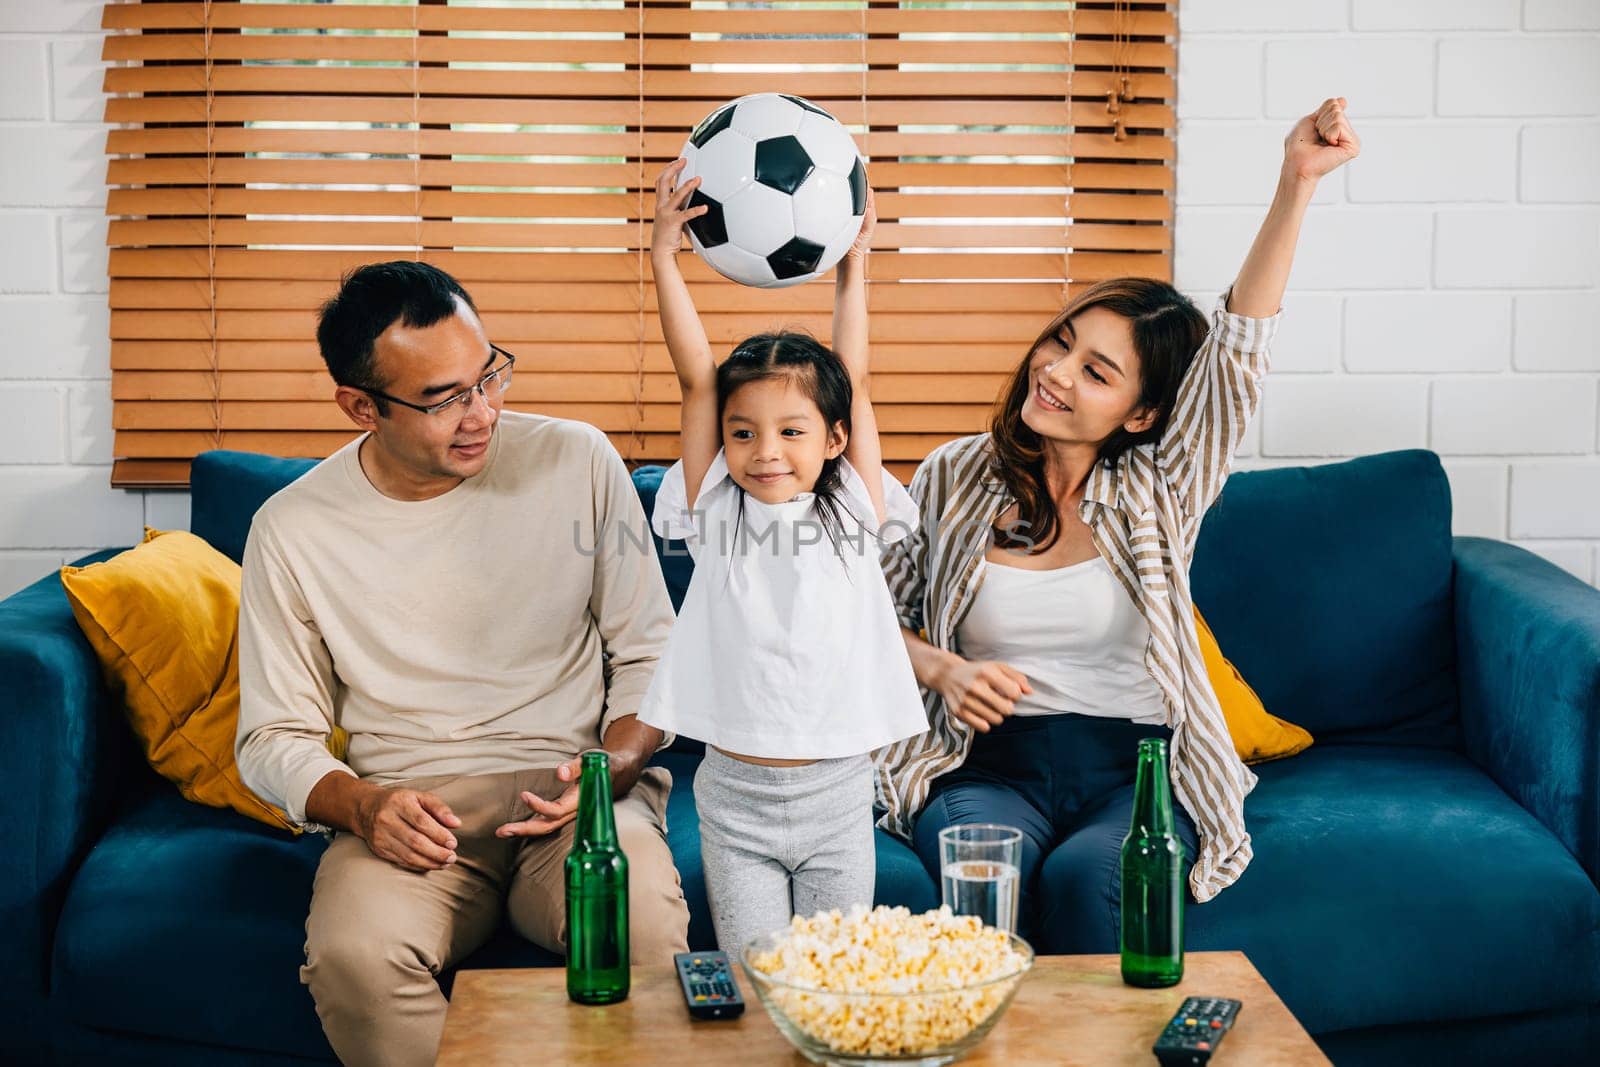 A jubilant family, with popcorn and a ball, raises their arms, cheering while watching a football match at home. Their togetherness and excitement reflect the joy of winning.